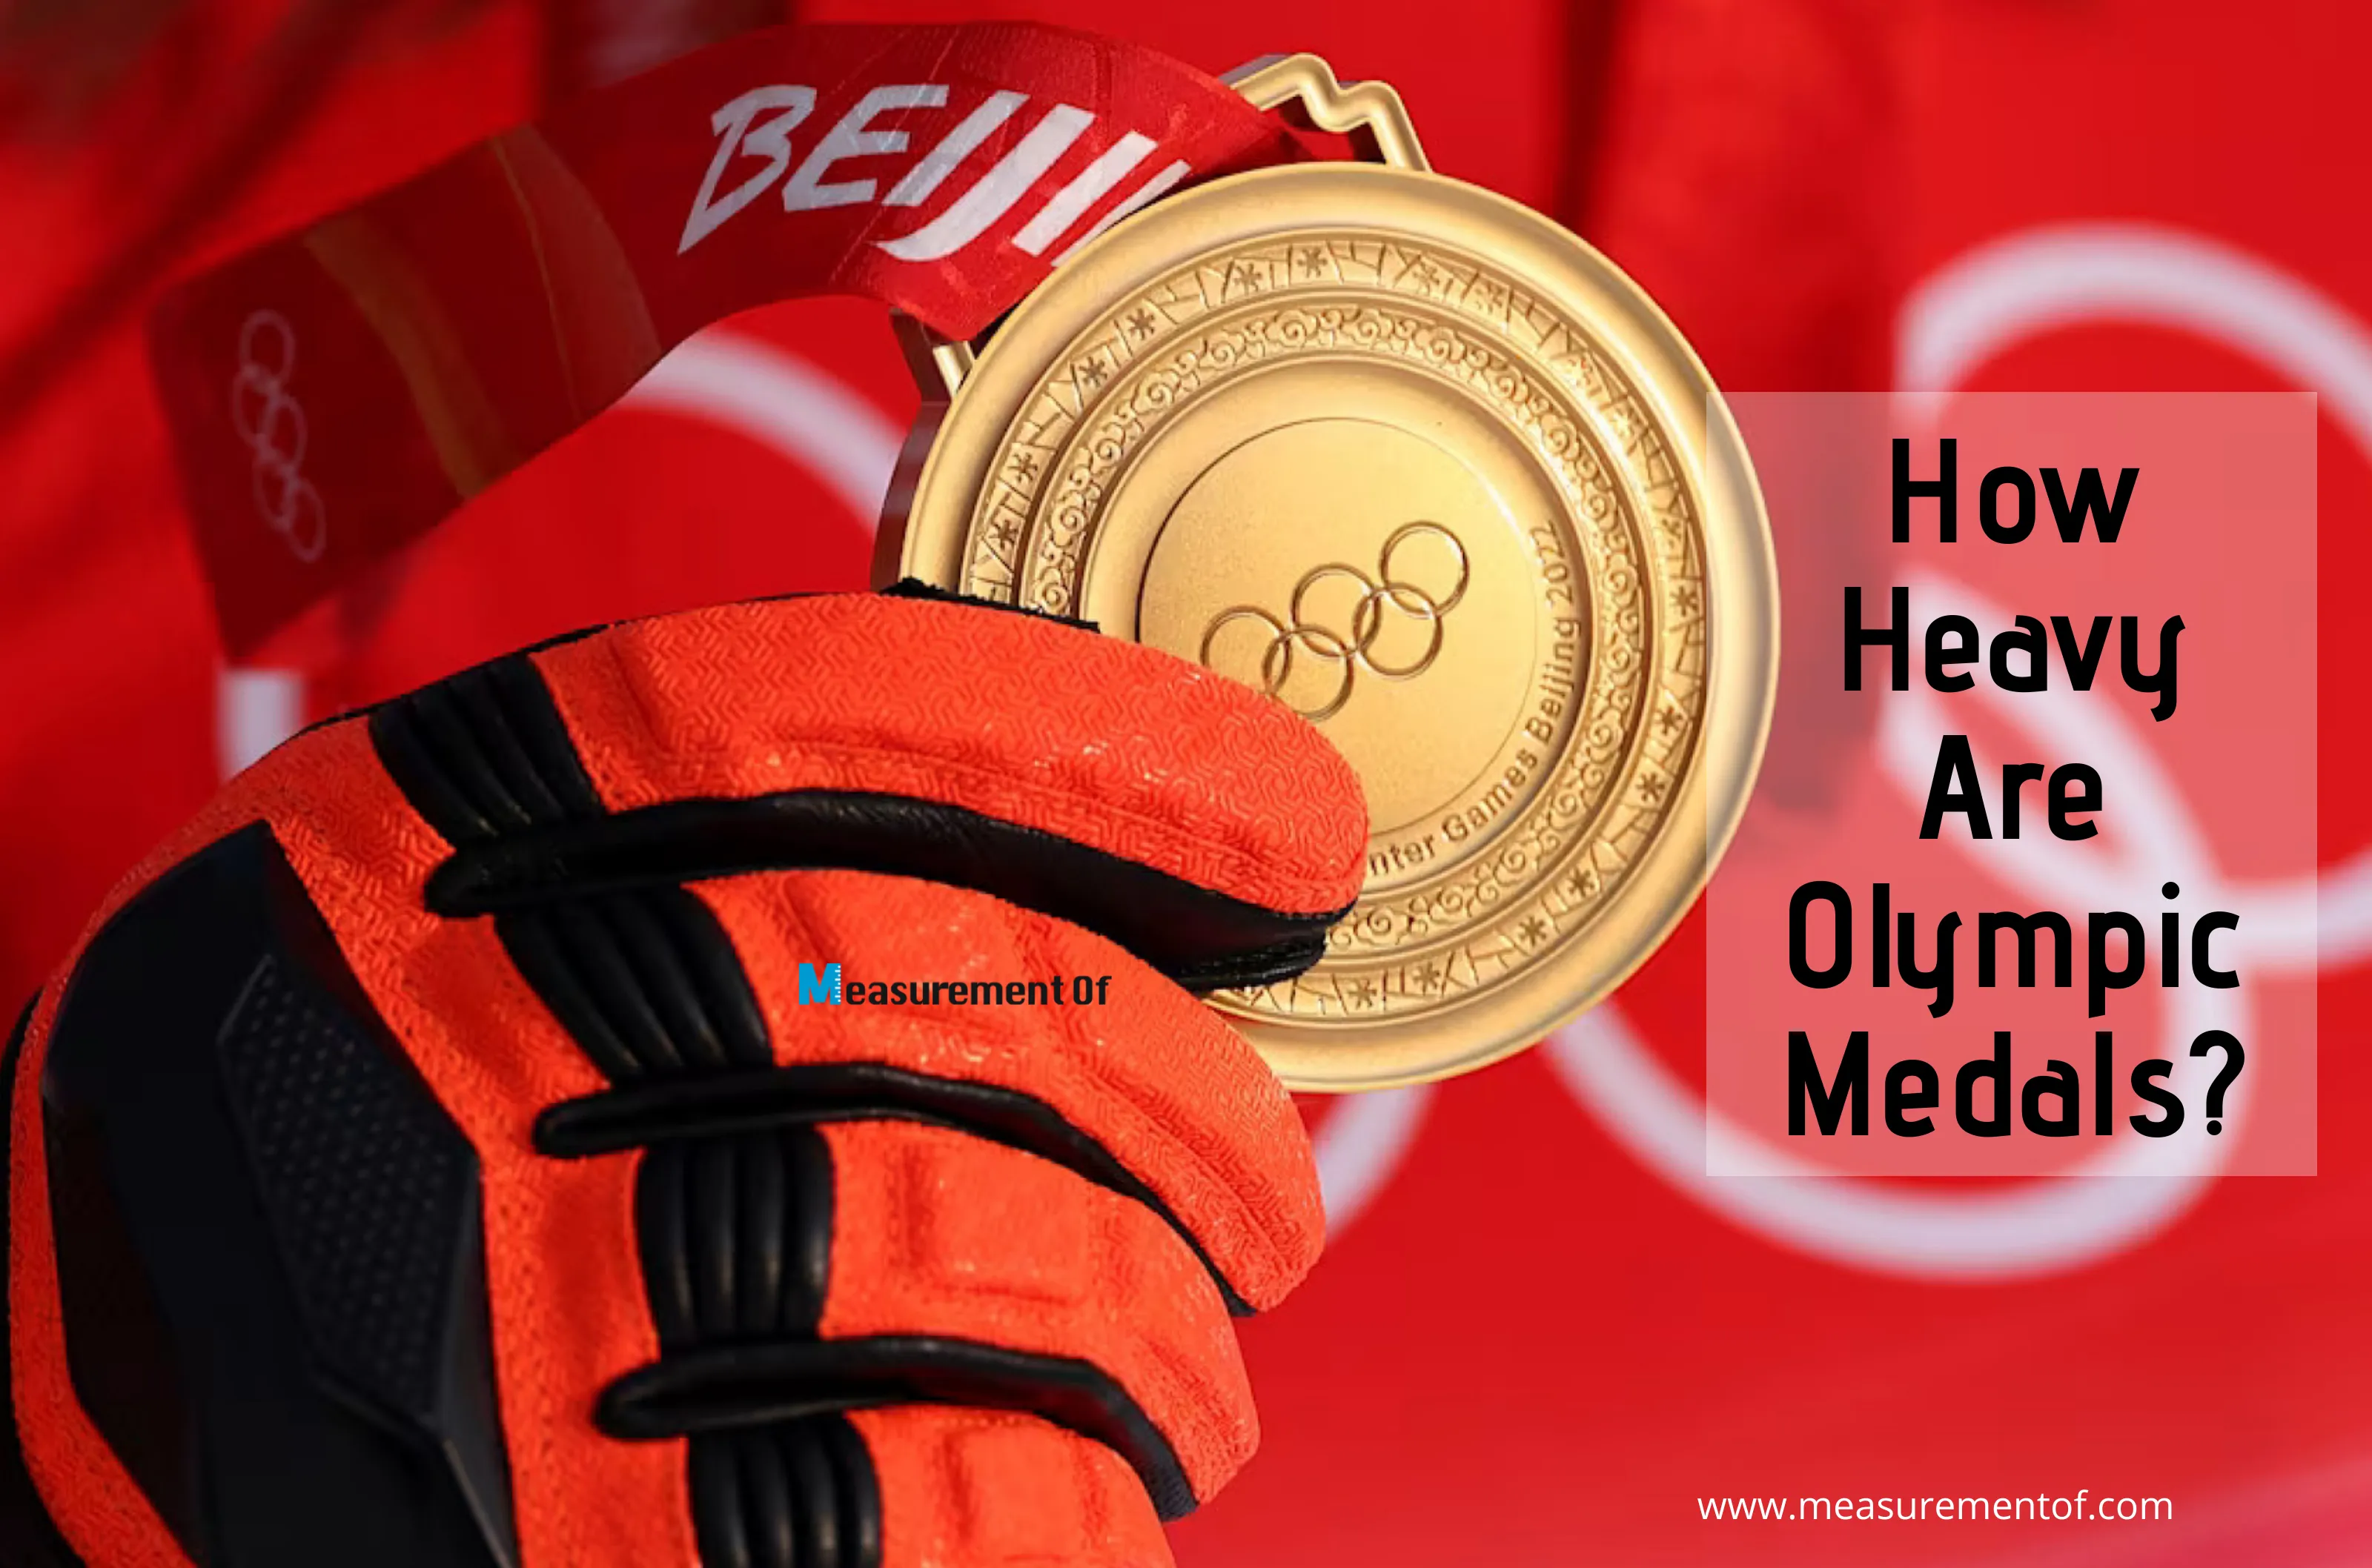 How Heavy Are Olympic Medals blog banner.webp